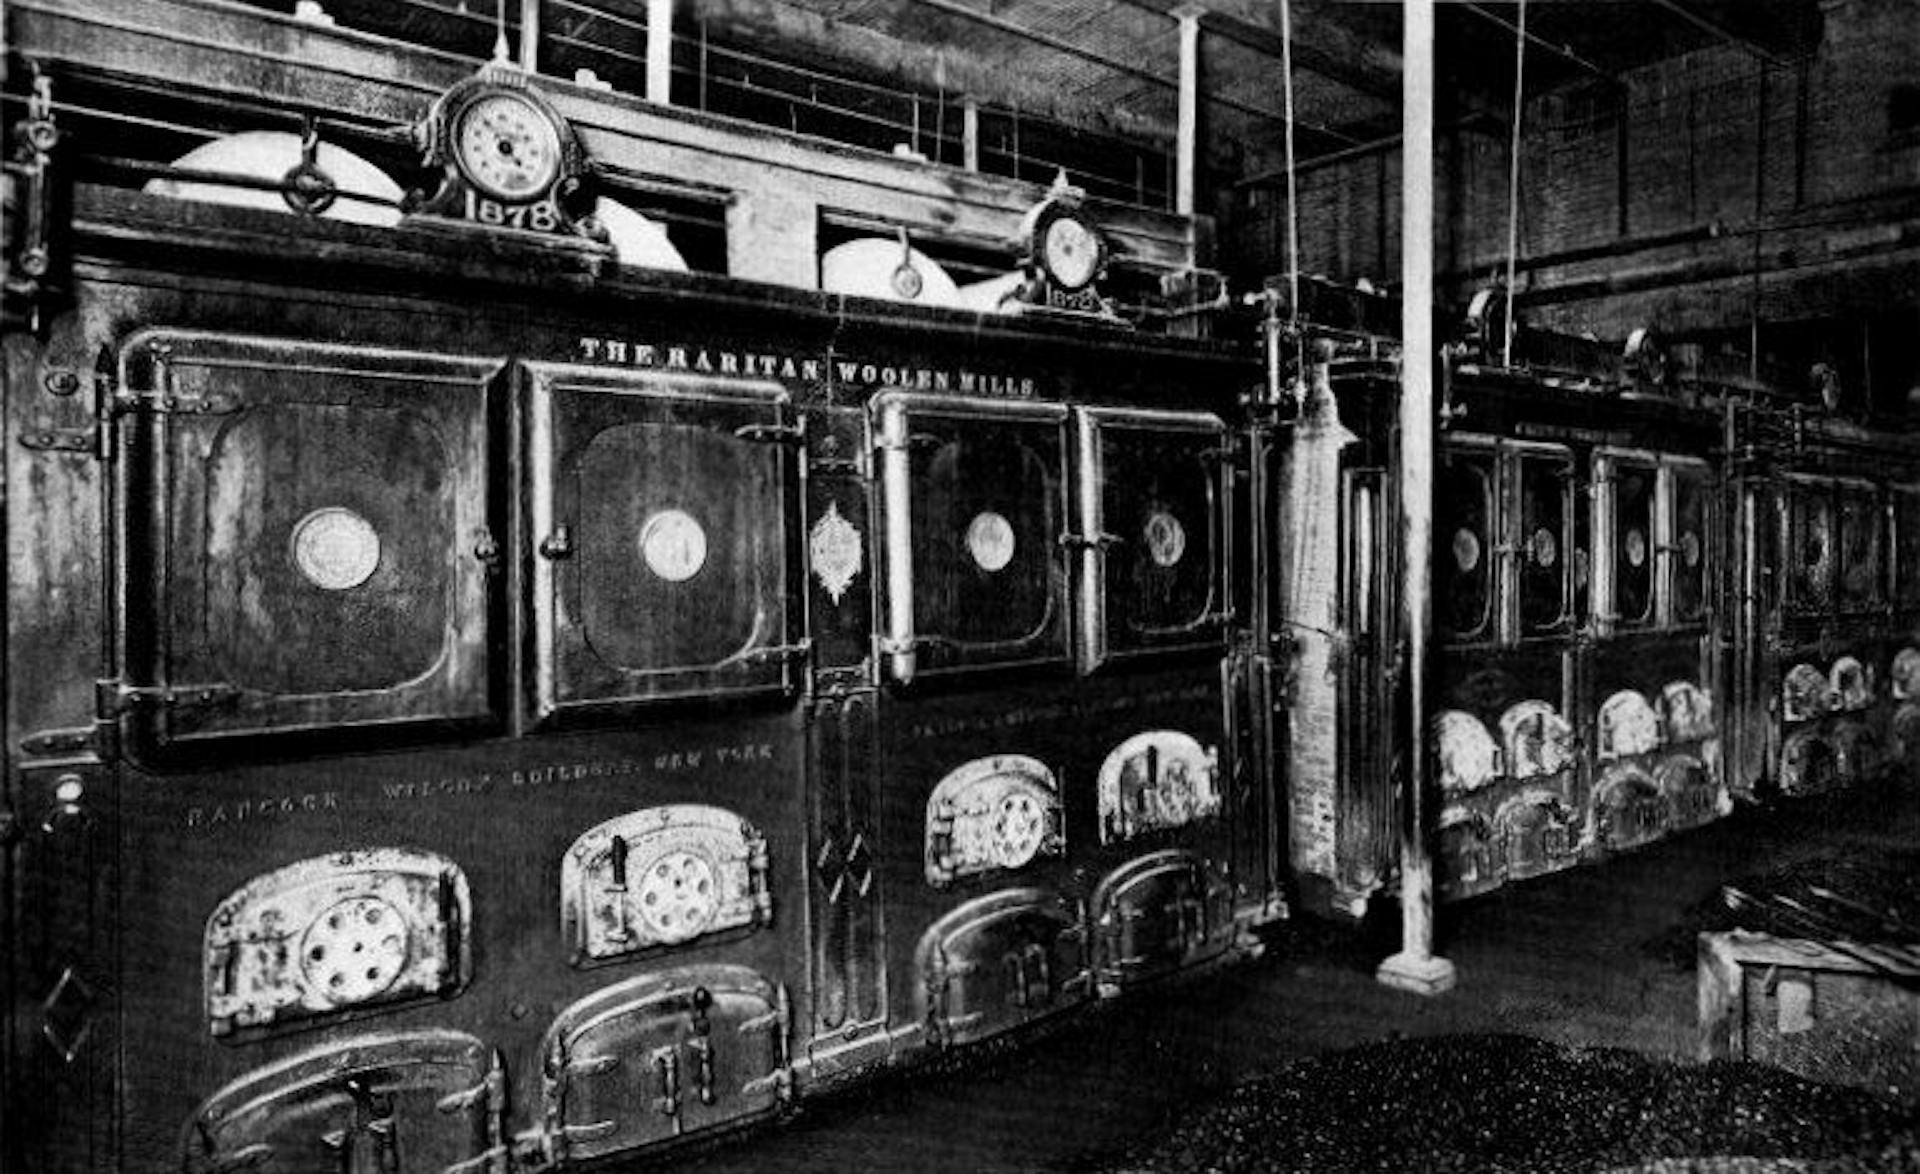 1456 Horse-power Installation of Babcock & Wilcox Boilers at the Raritan Woolen Mills, Raritan, N. J. The First of These Boilers were Installed in 1878 and 1881 and are still Operated at 80 Pounds Pressure